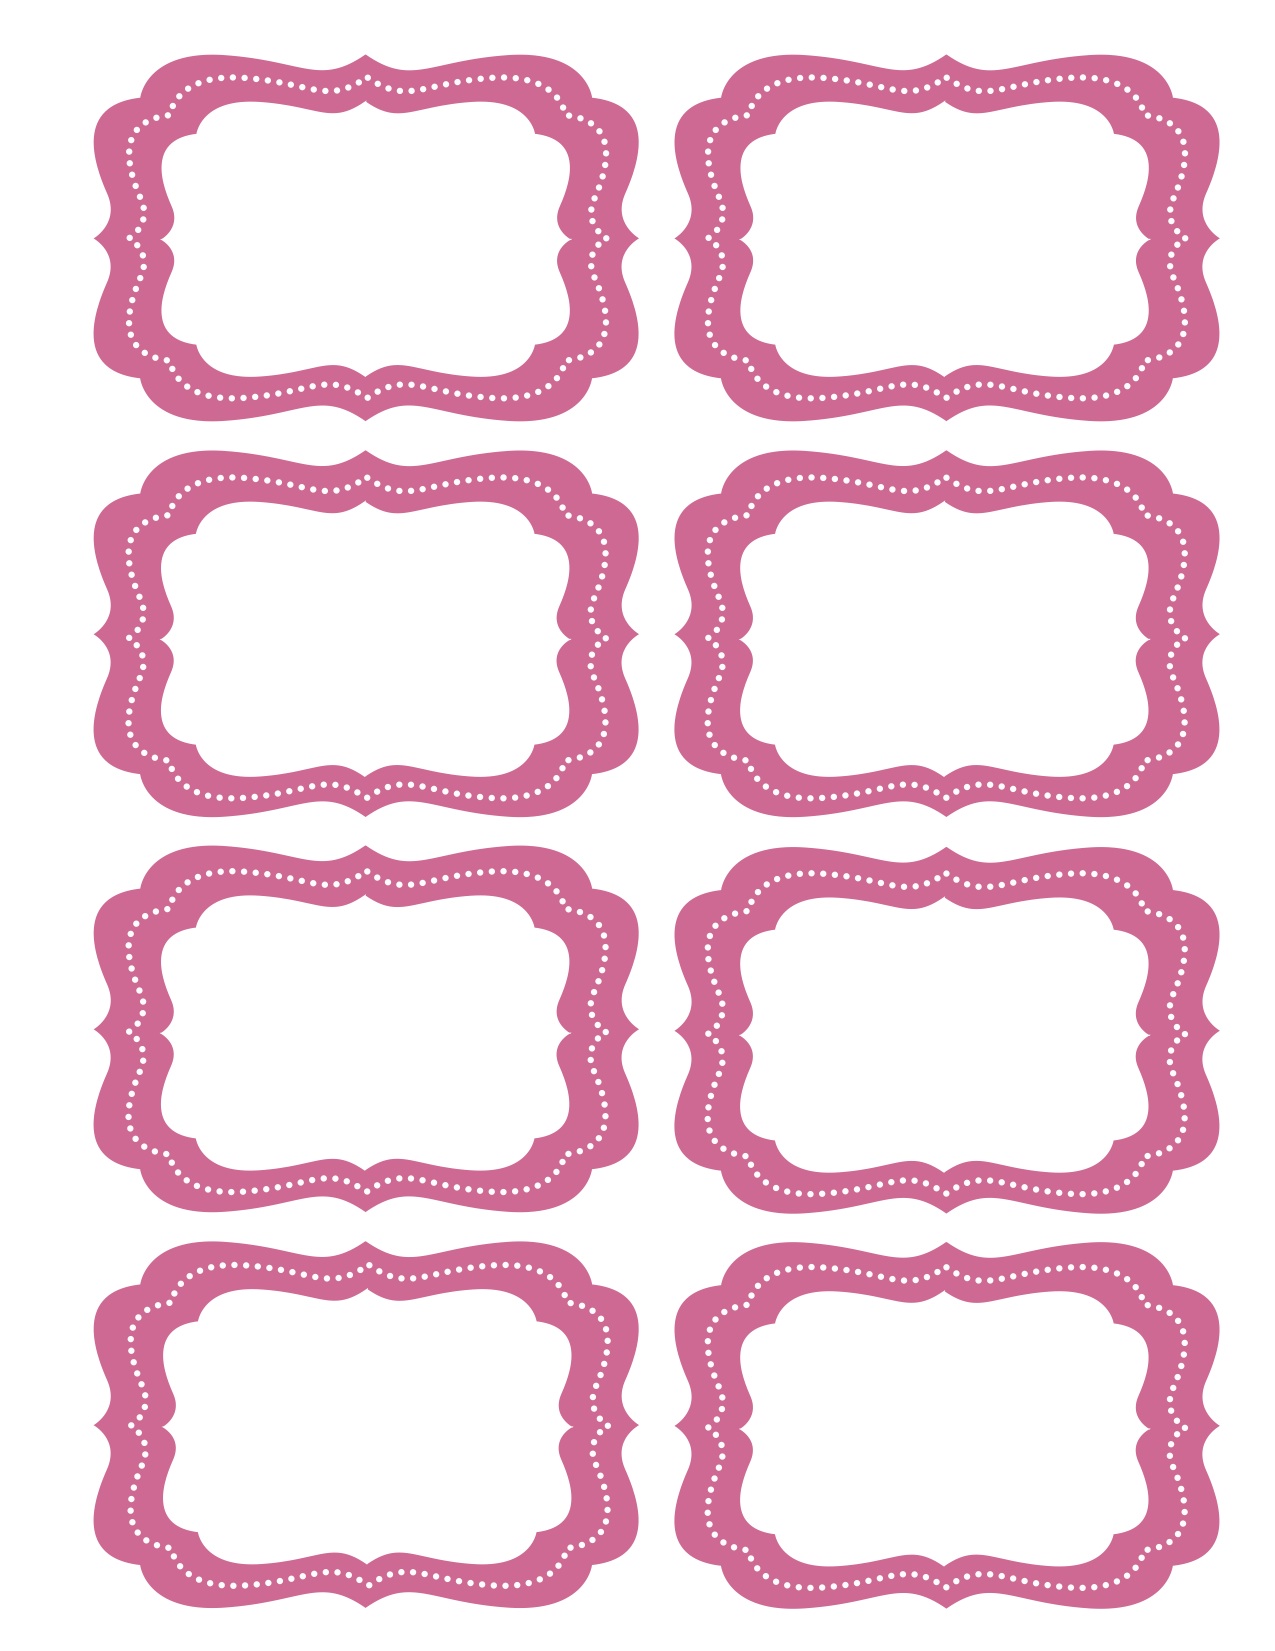 Candy Labels Blank   Free Images At Clker Com   Vector Clip Art Online    